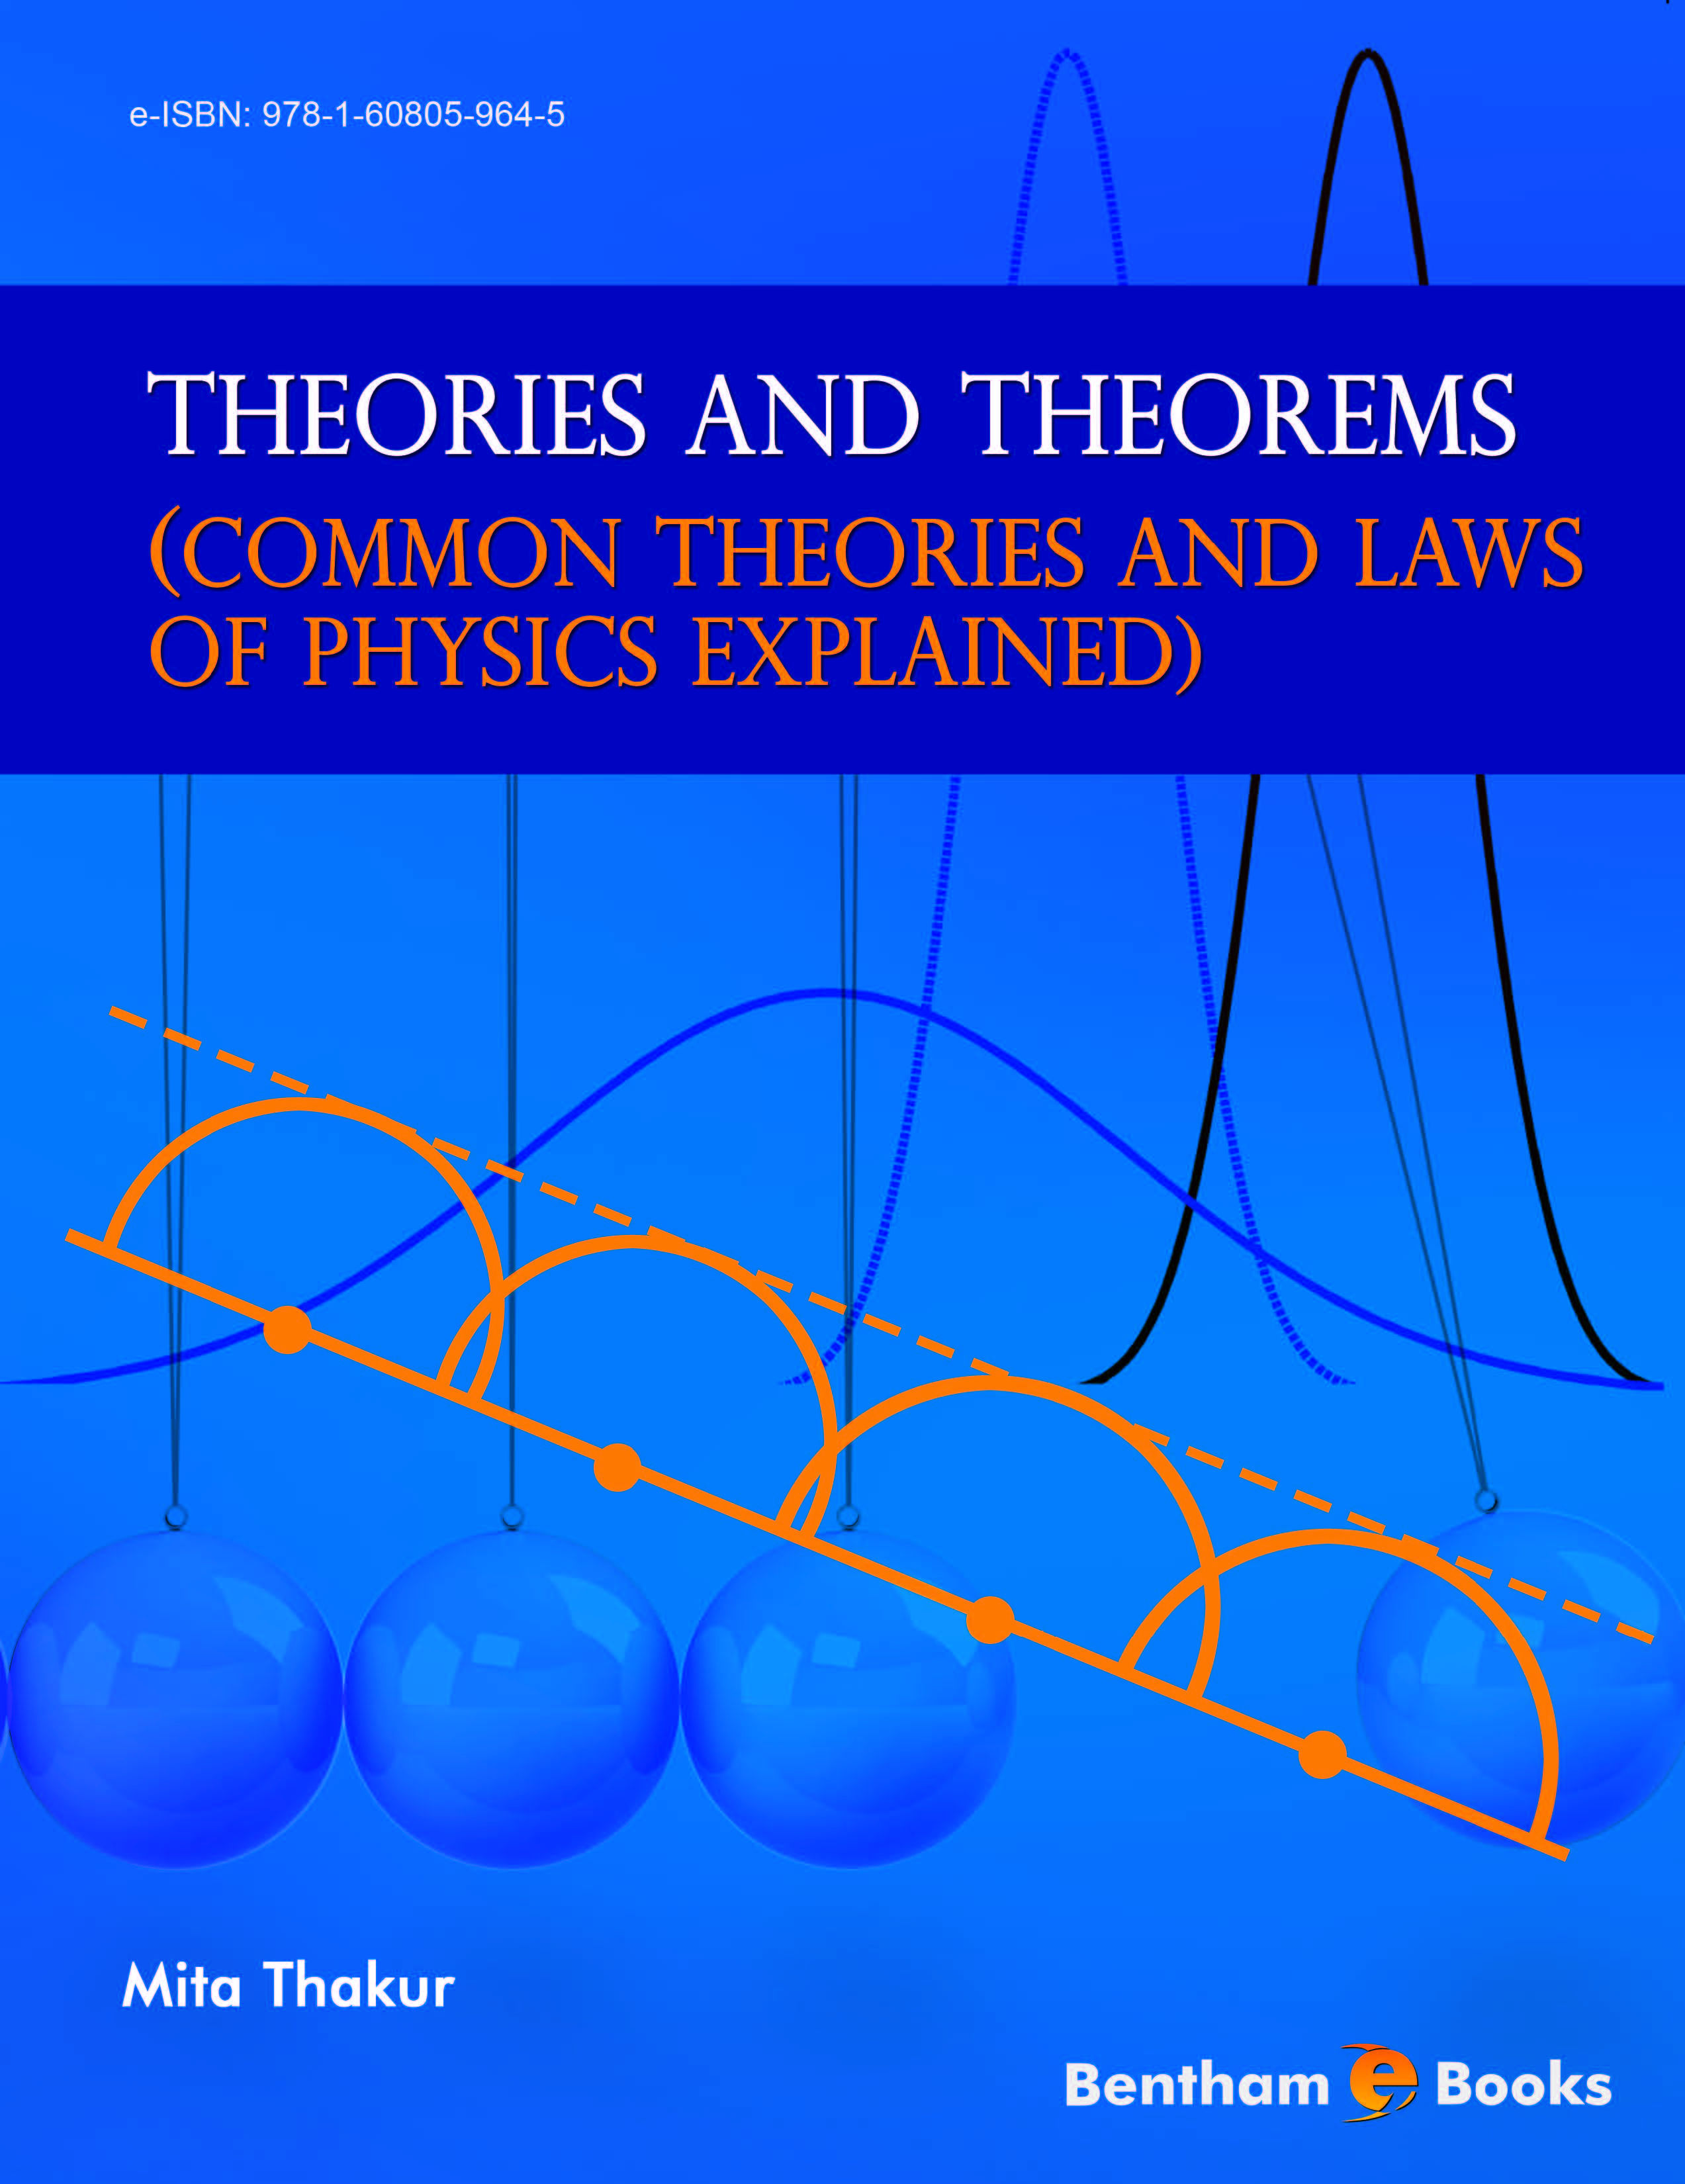 Theories and Theorems (Common Theories and Laws of Physics Explained)